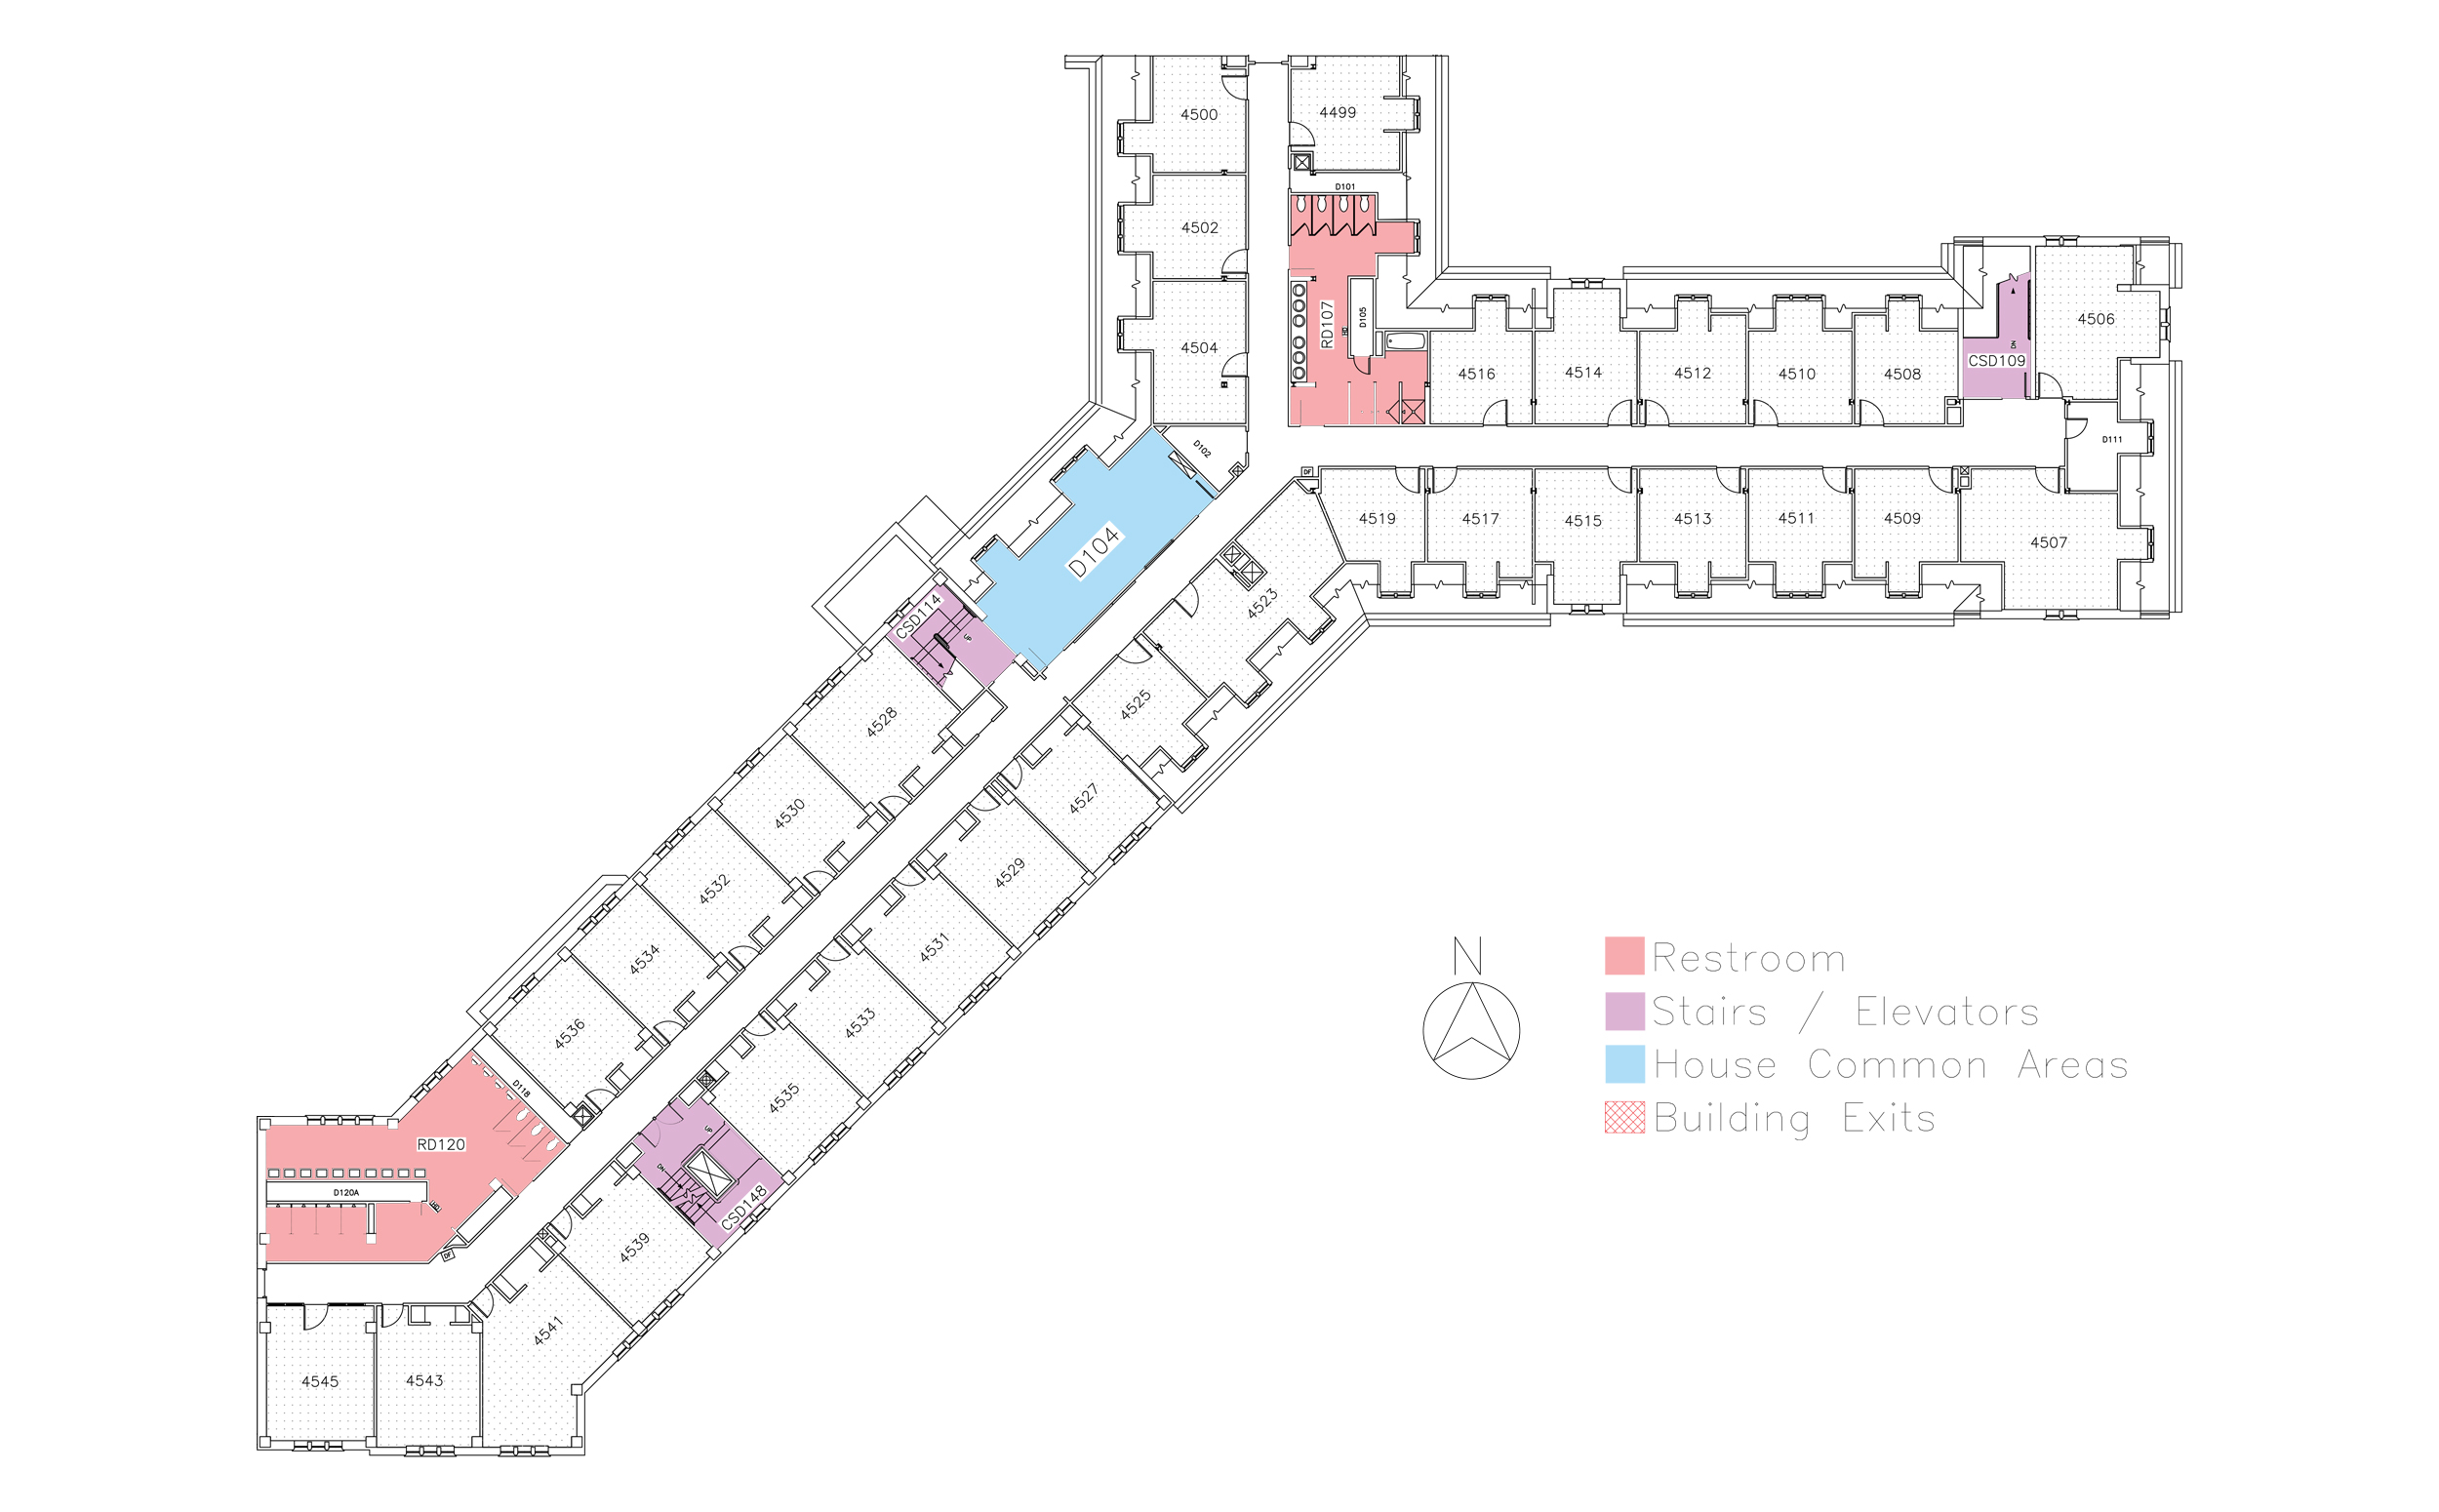 Floor plan for Meeker House, fourth floor in Friley Hall. Identifies the location of rooms, bathrooms and common space.